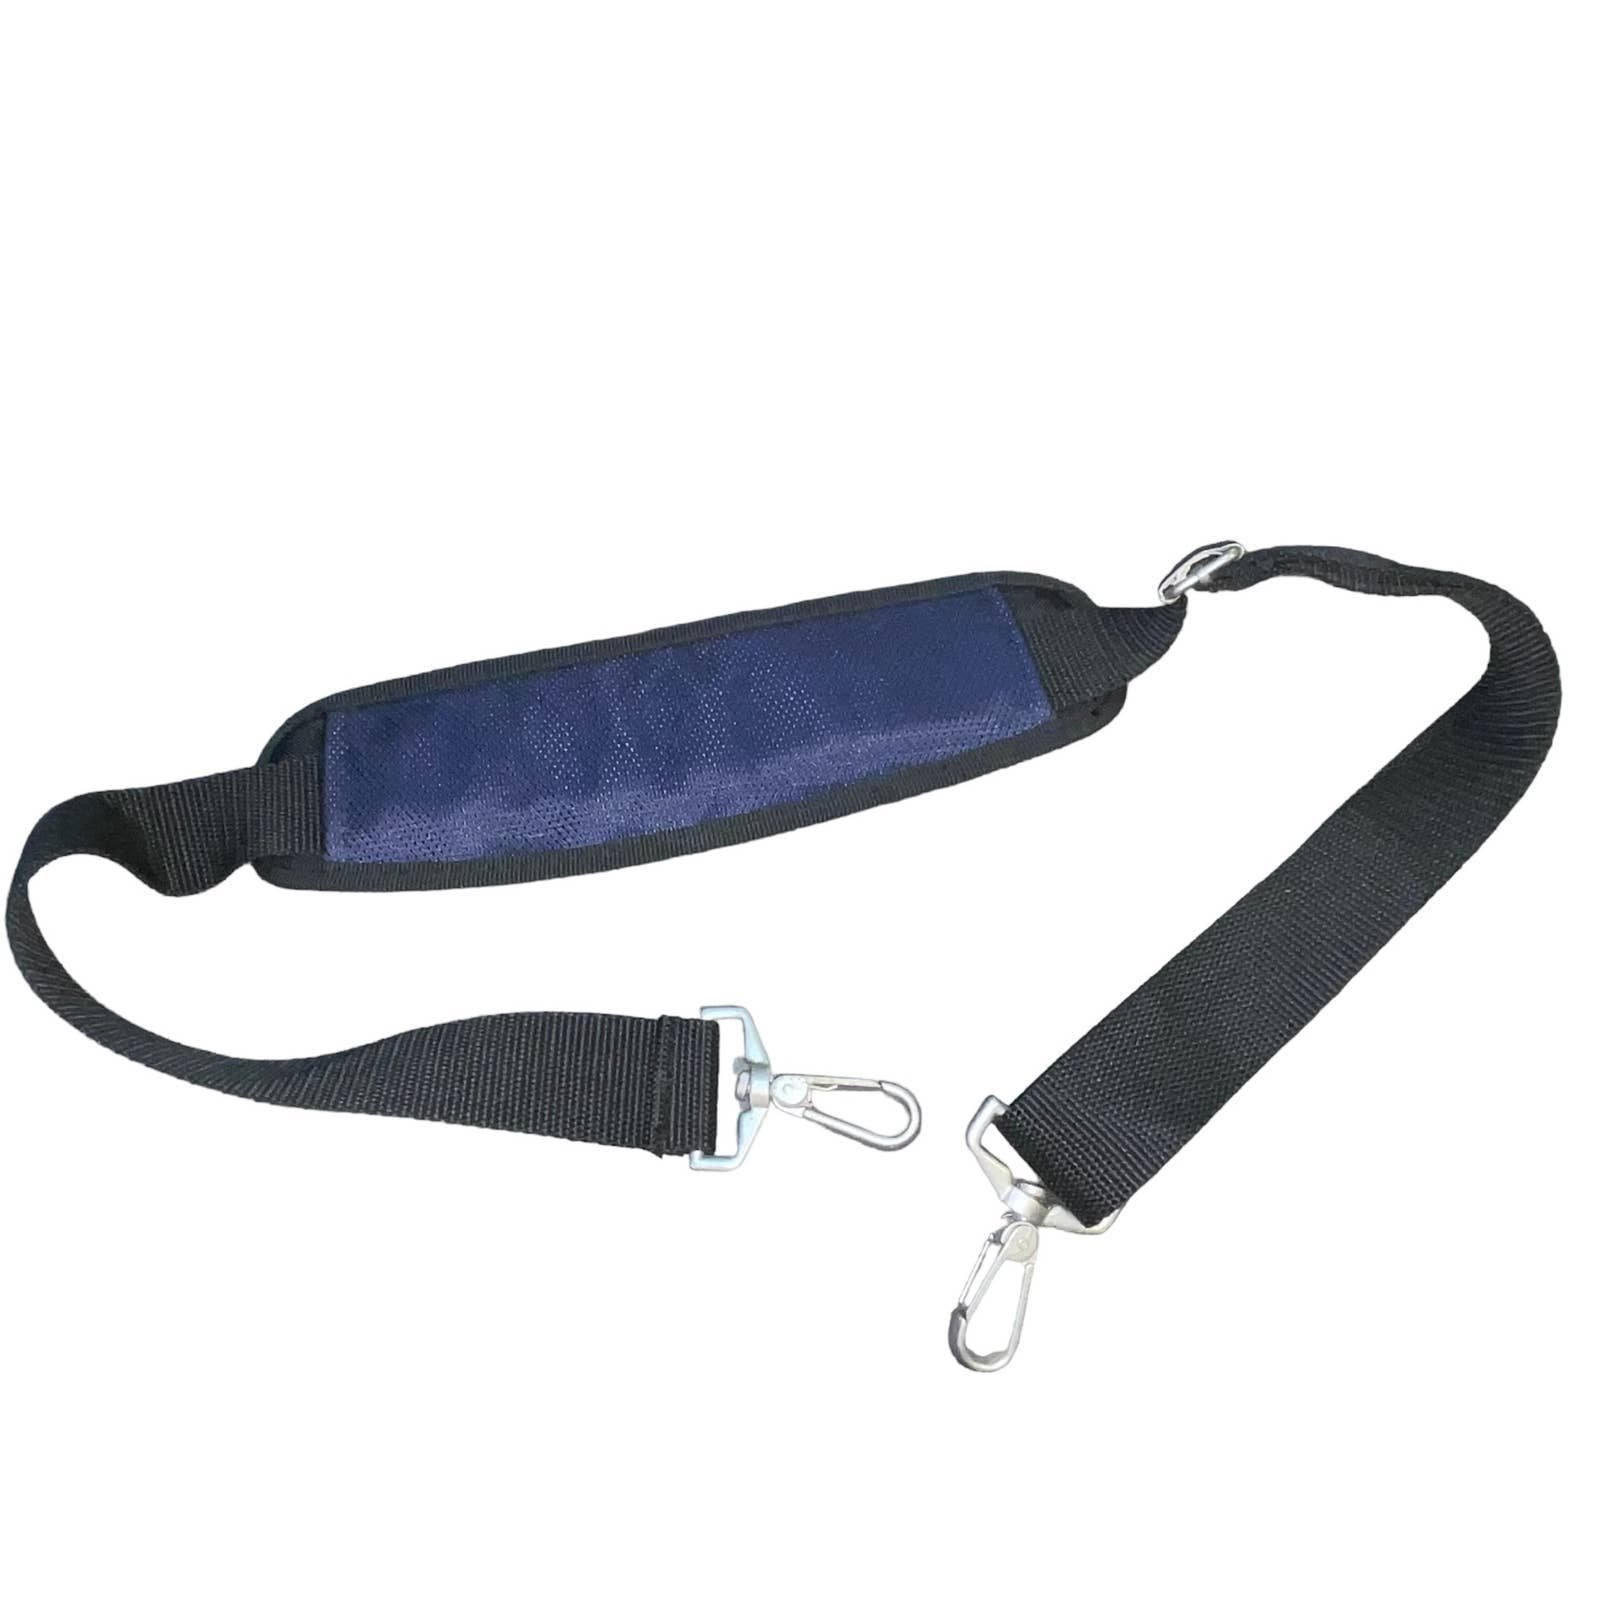 Duffel Messenger Bag Strap Replacement Adjustable Carry Case Padded Black Navy j62MsINMt